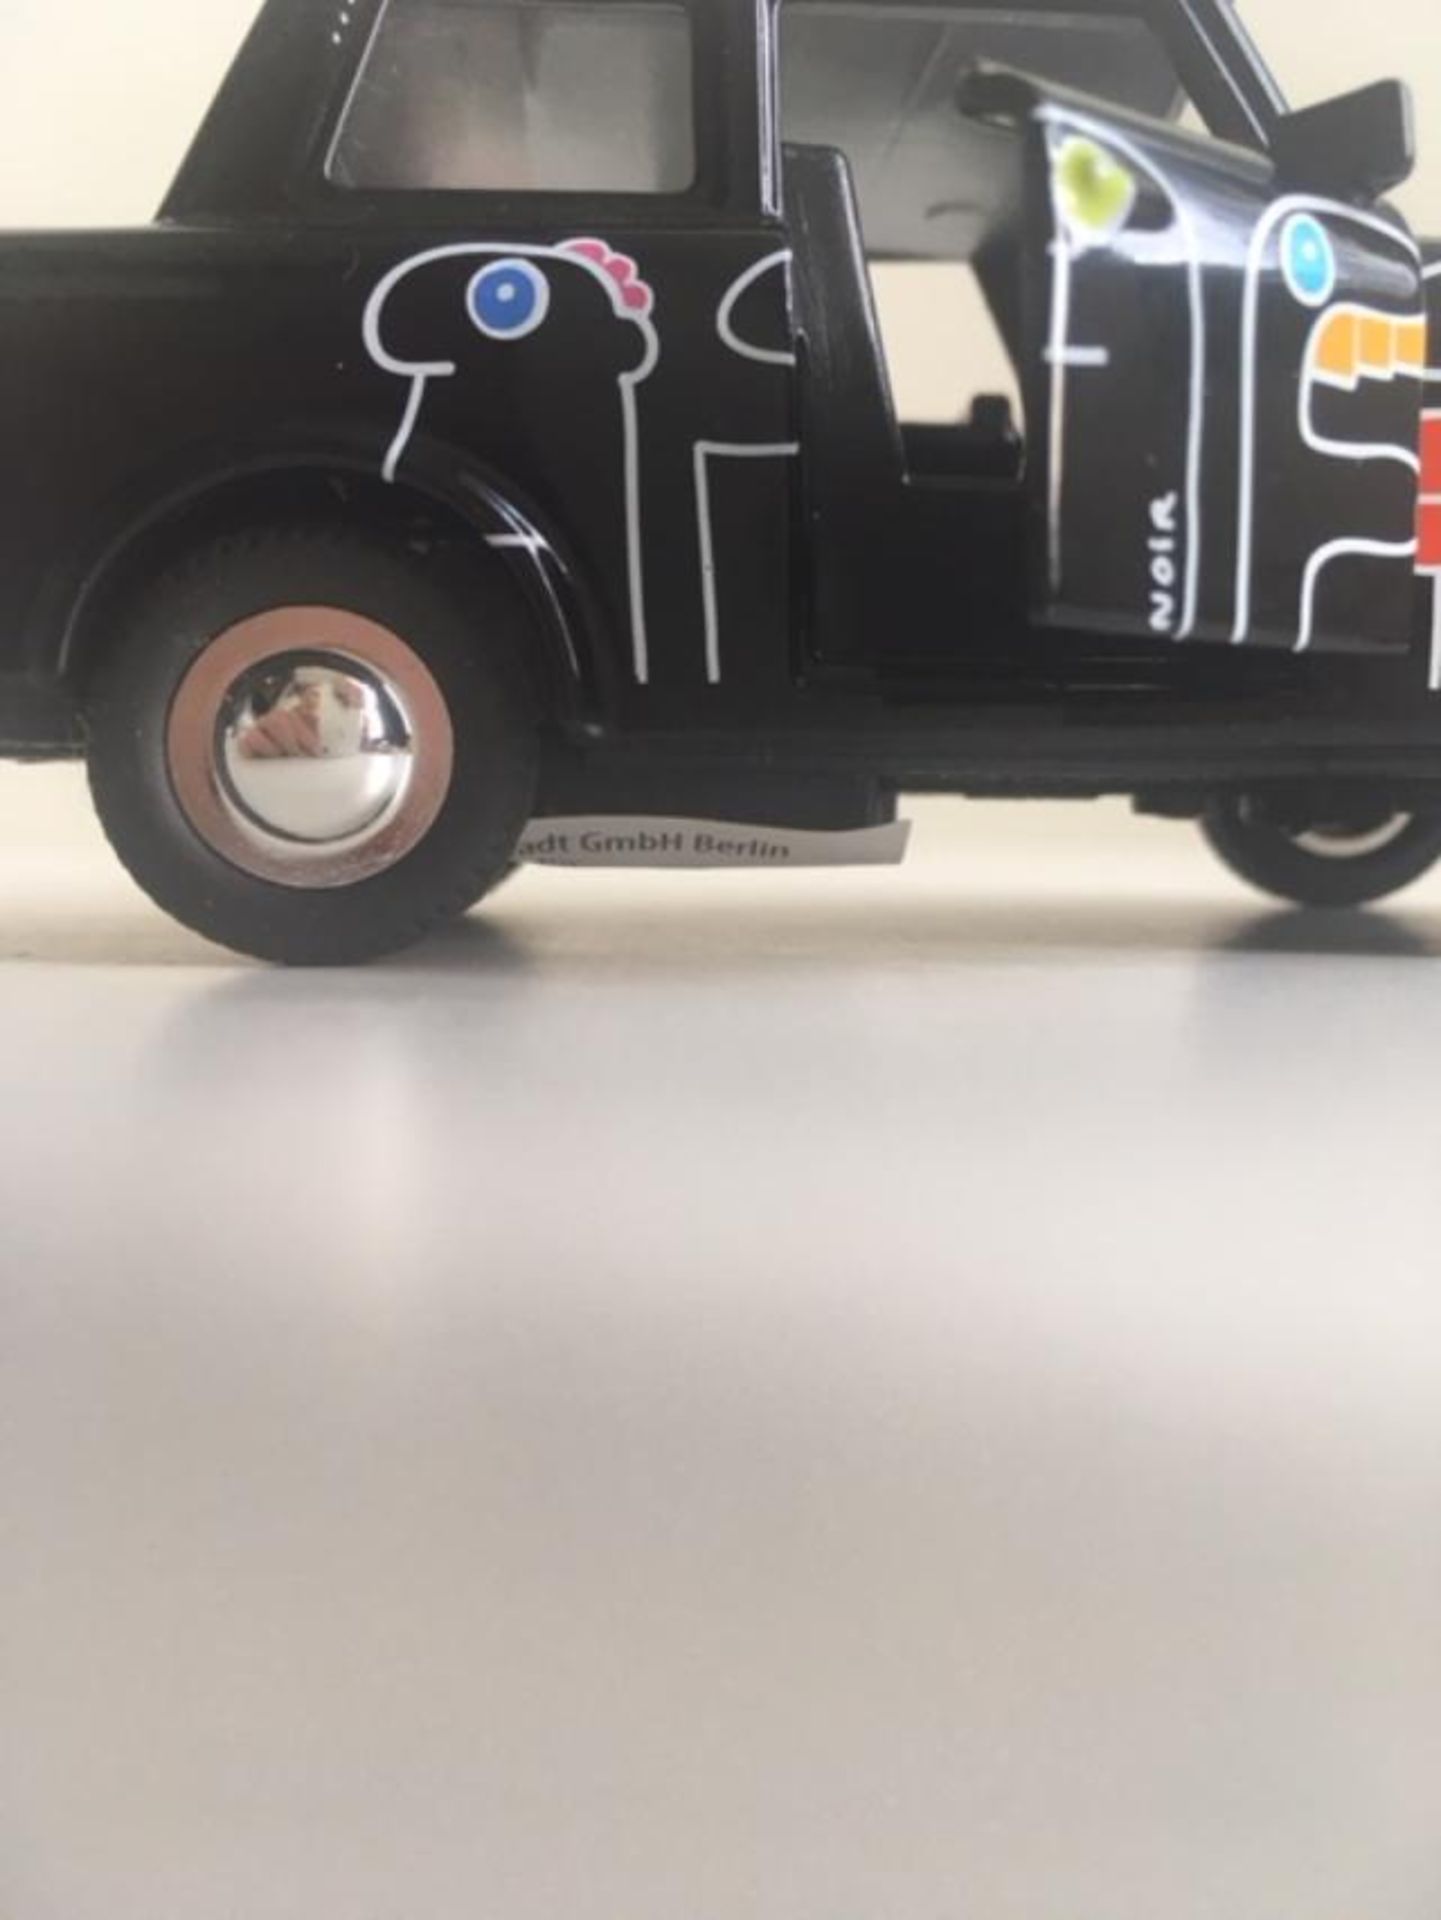 Thierry Noir (B.1958) Black ‘Heads’ Berlin Trabant Car In Colours By Thierry Noir, 1994, Sold Out - Image 12 of 21